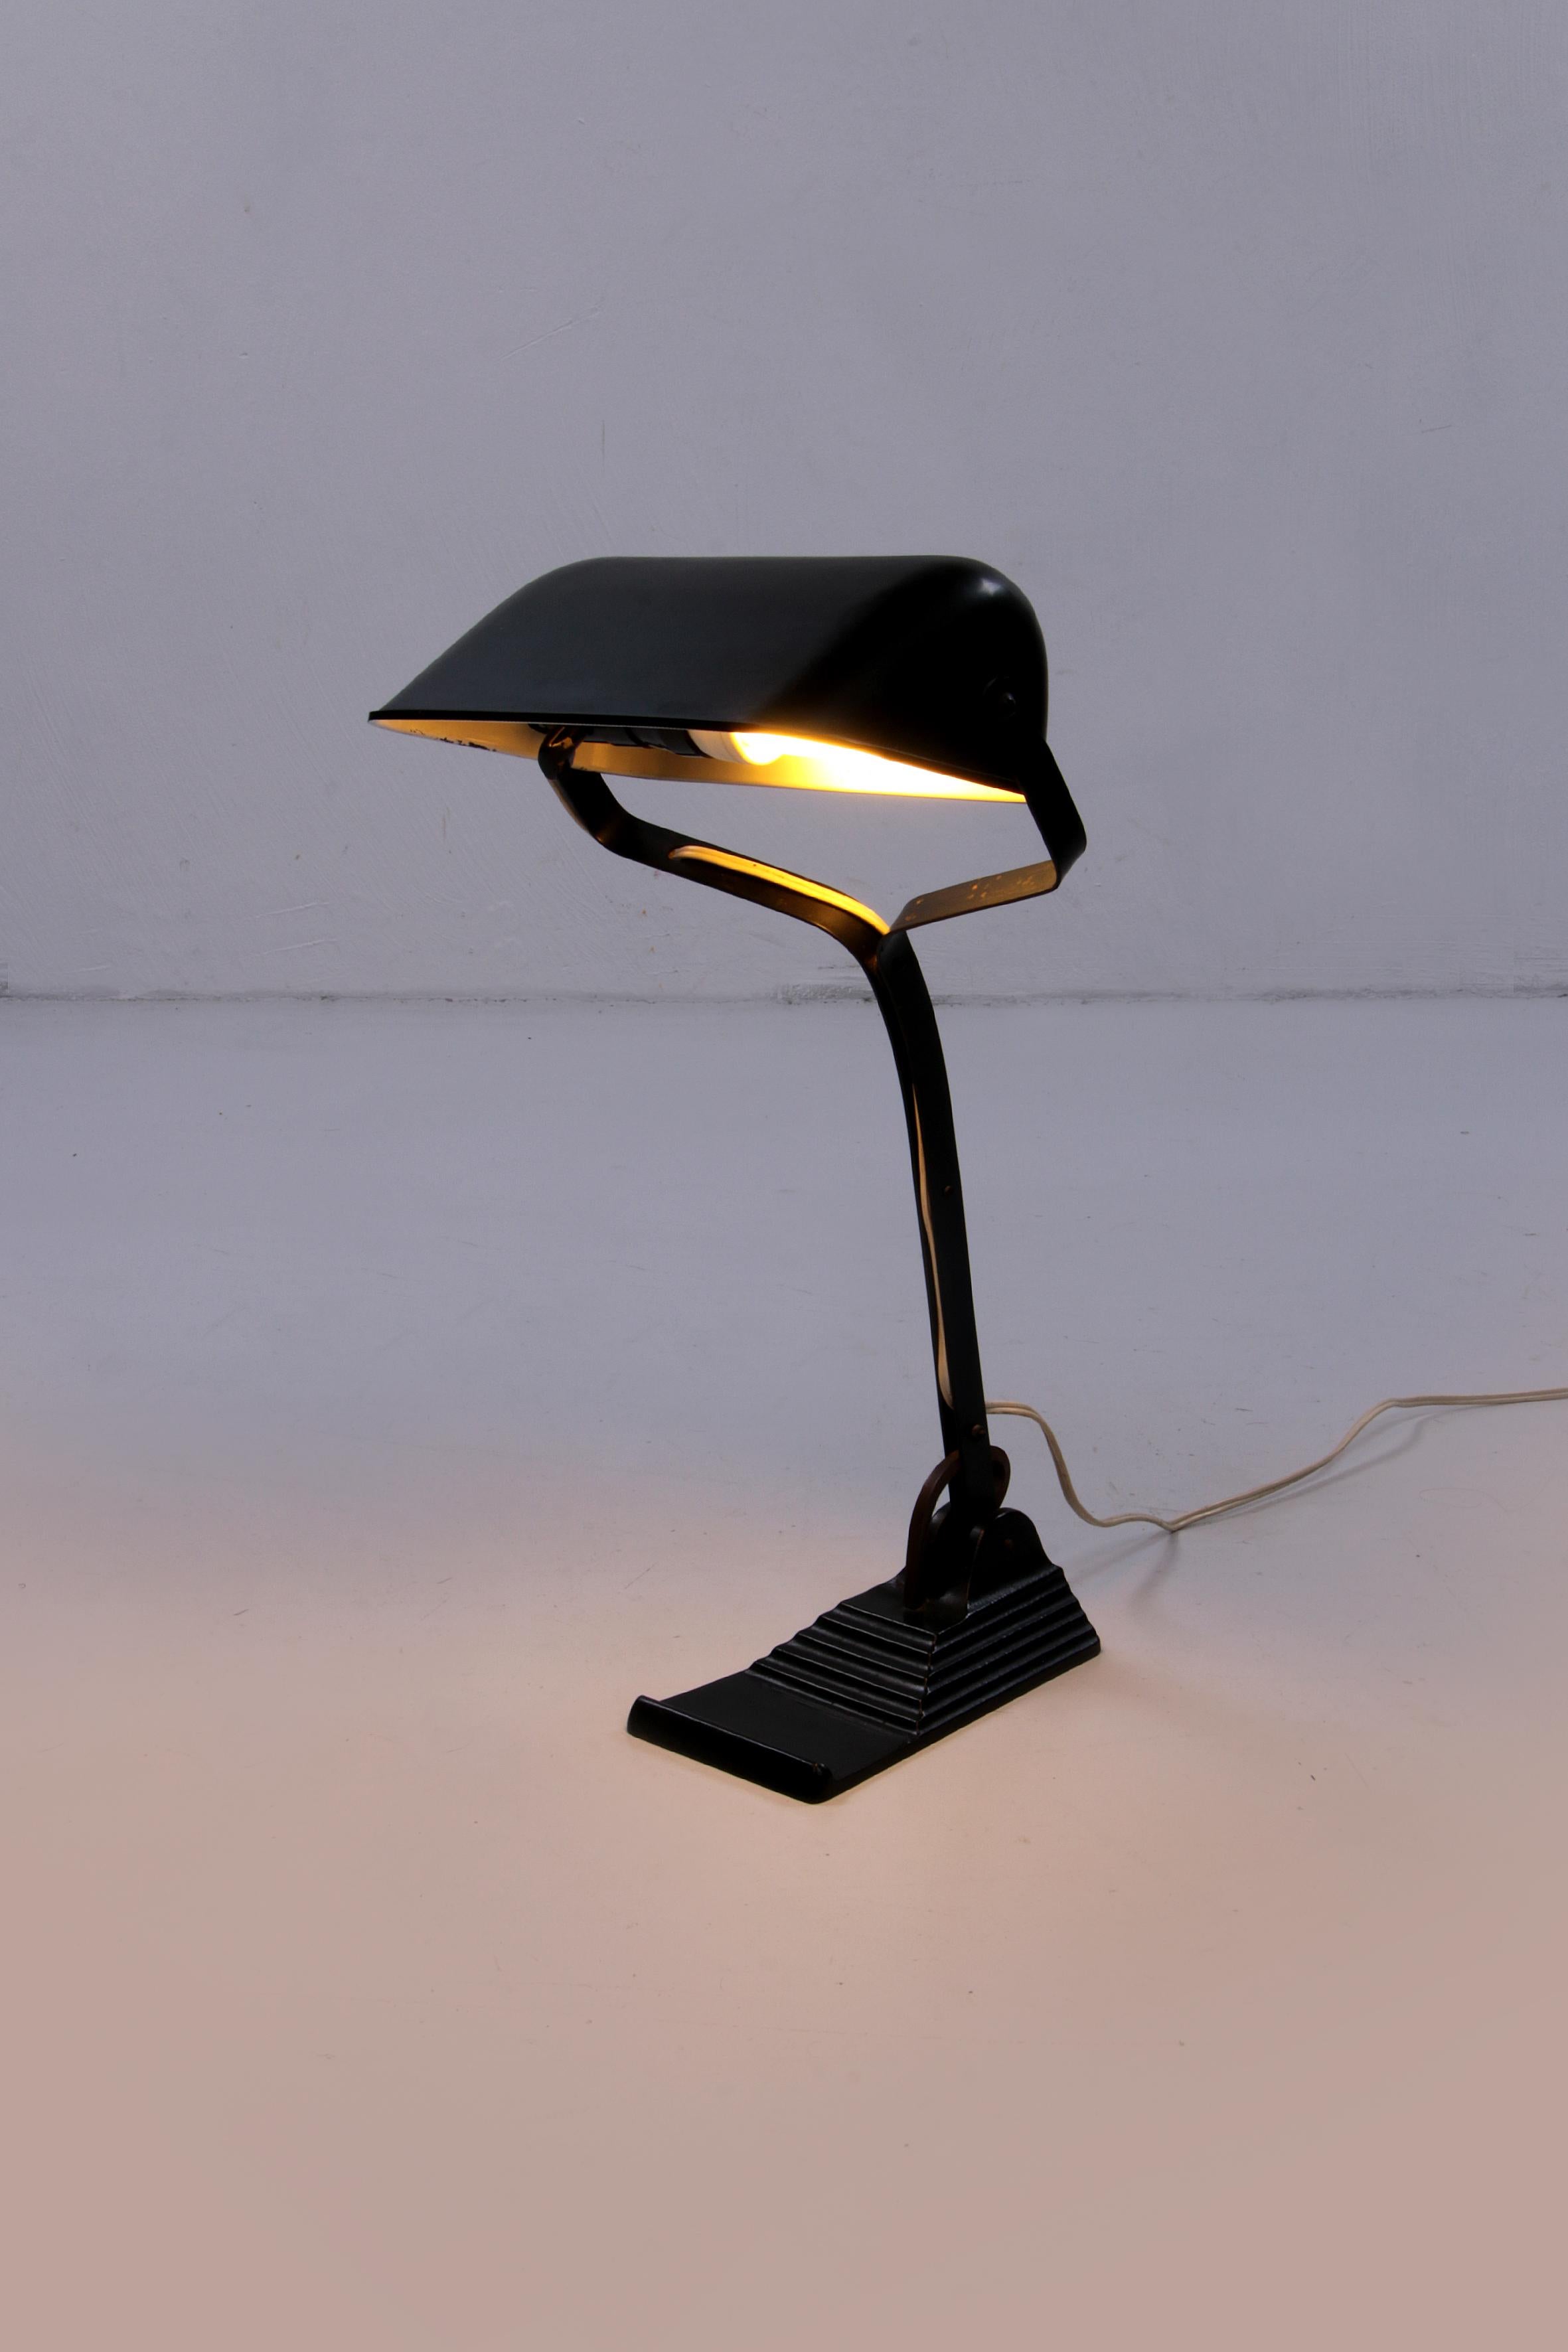 Belgian Art Deco desk lamp also called (notary lamp) made by Erpe Belgium. For Sale